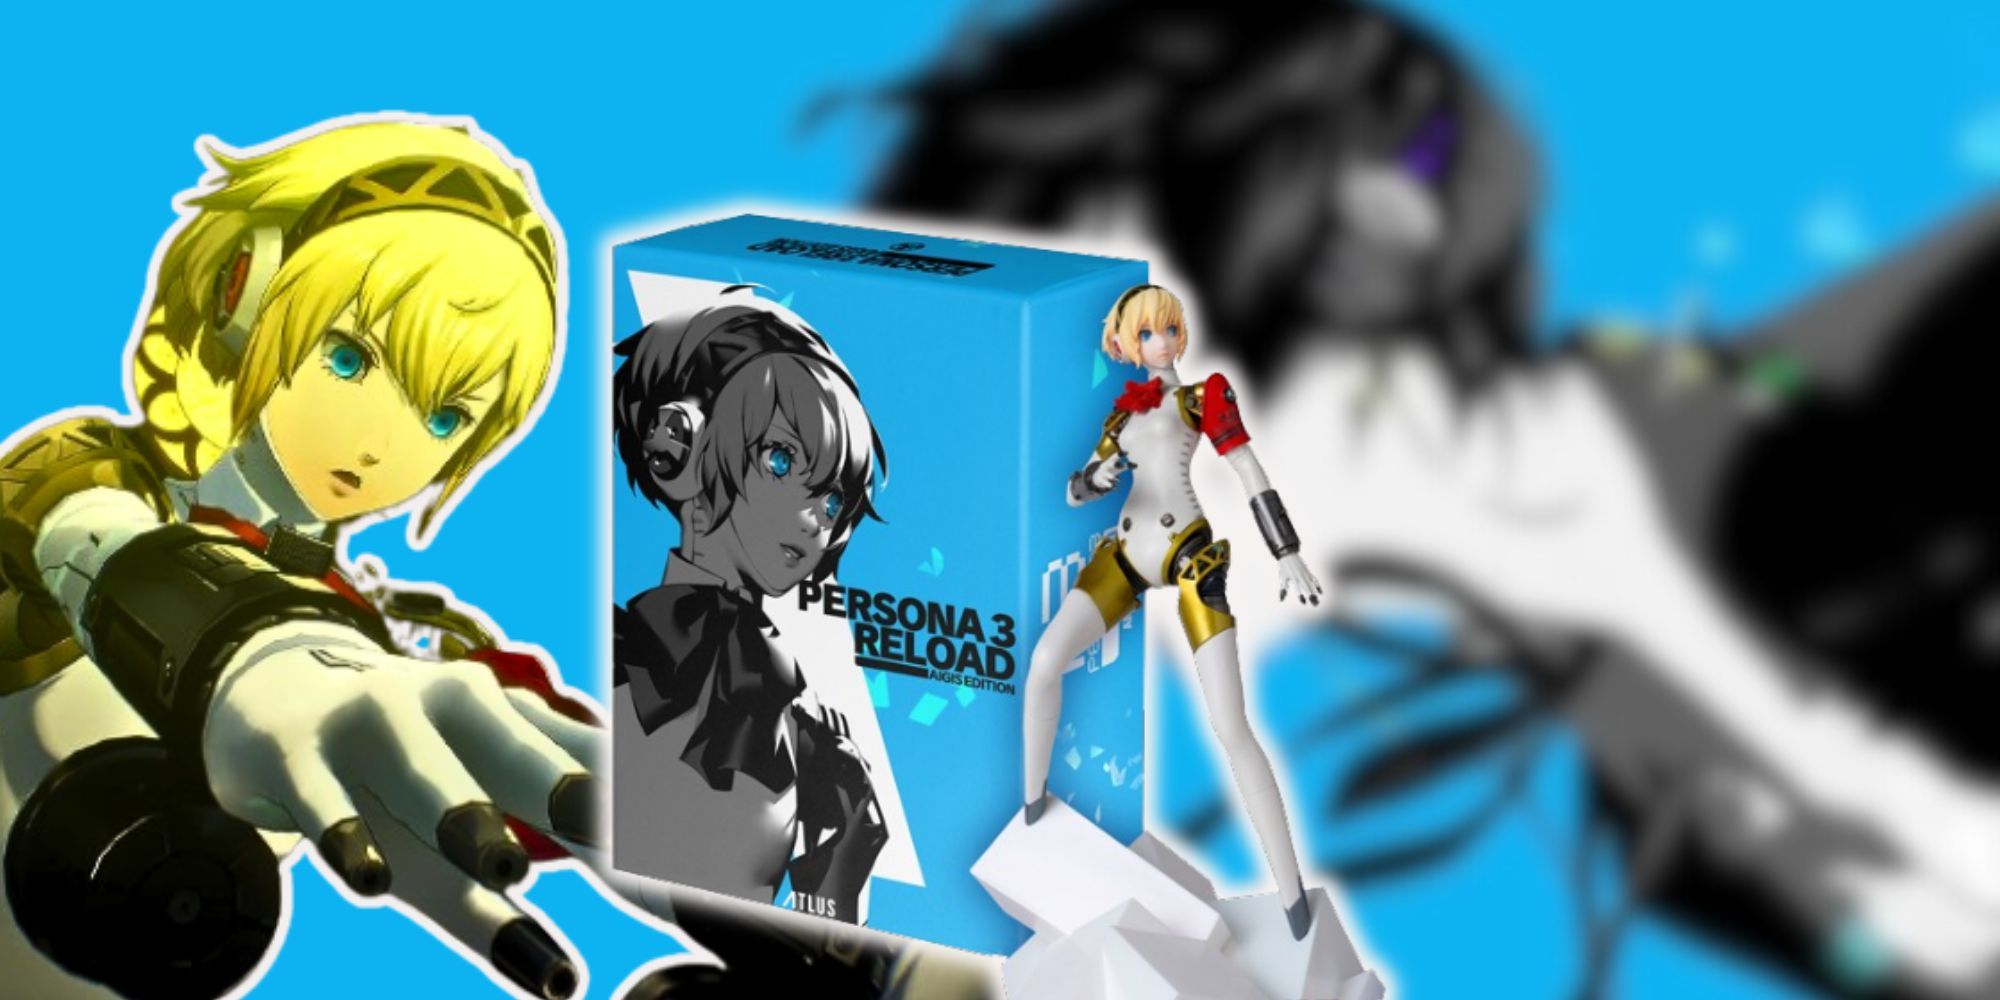 Xbox One/Series X Persona 3 RELOAD AEGIS - Collector's Edition 